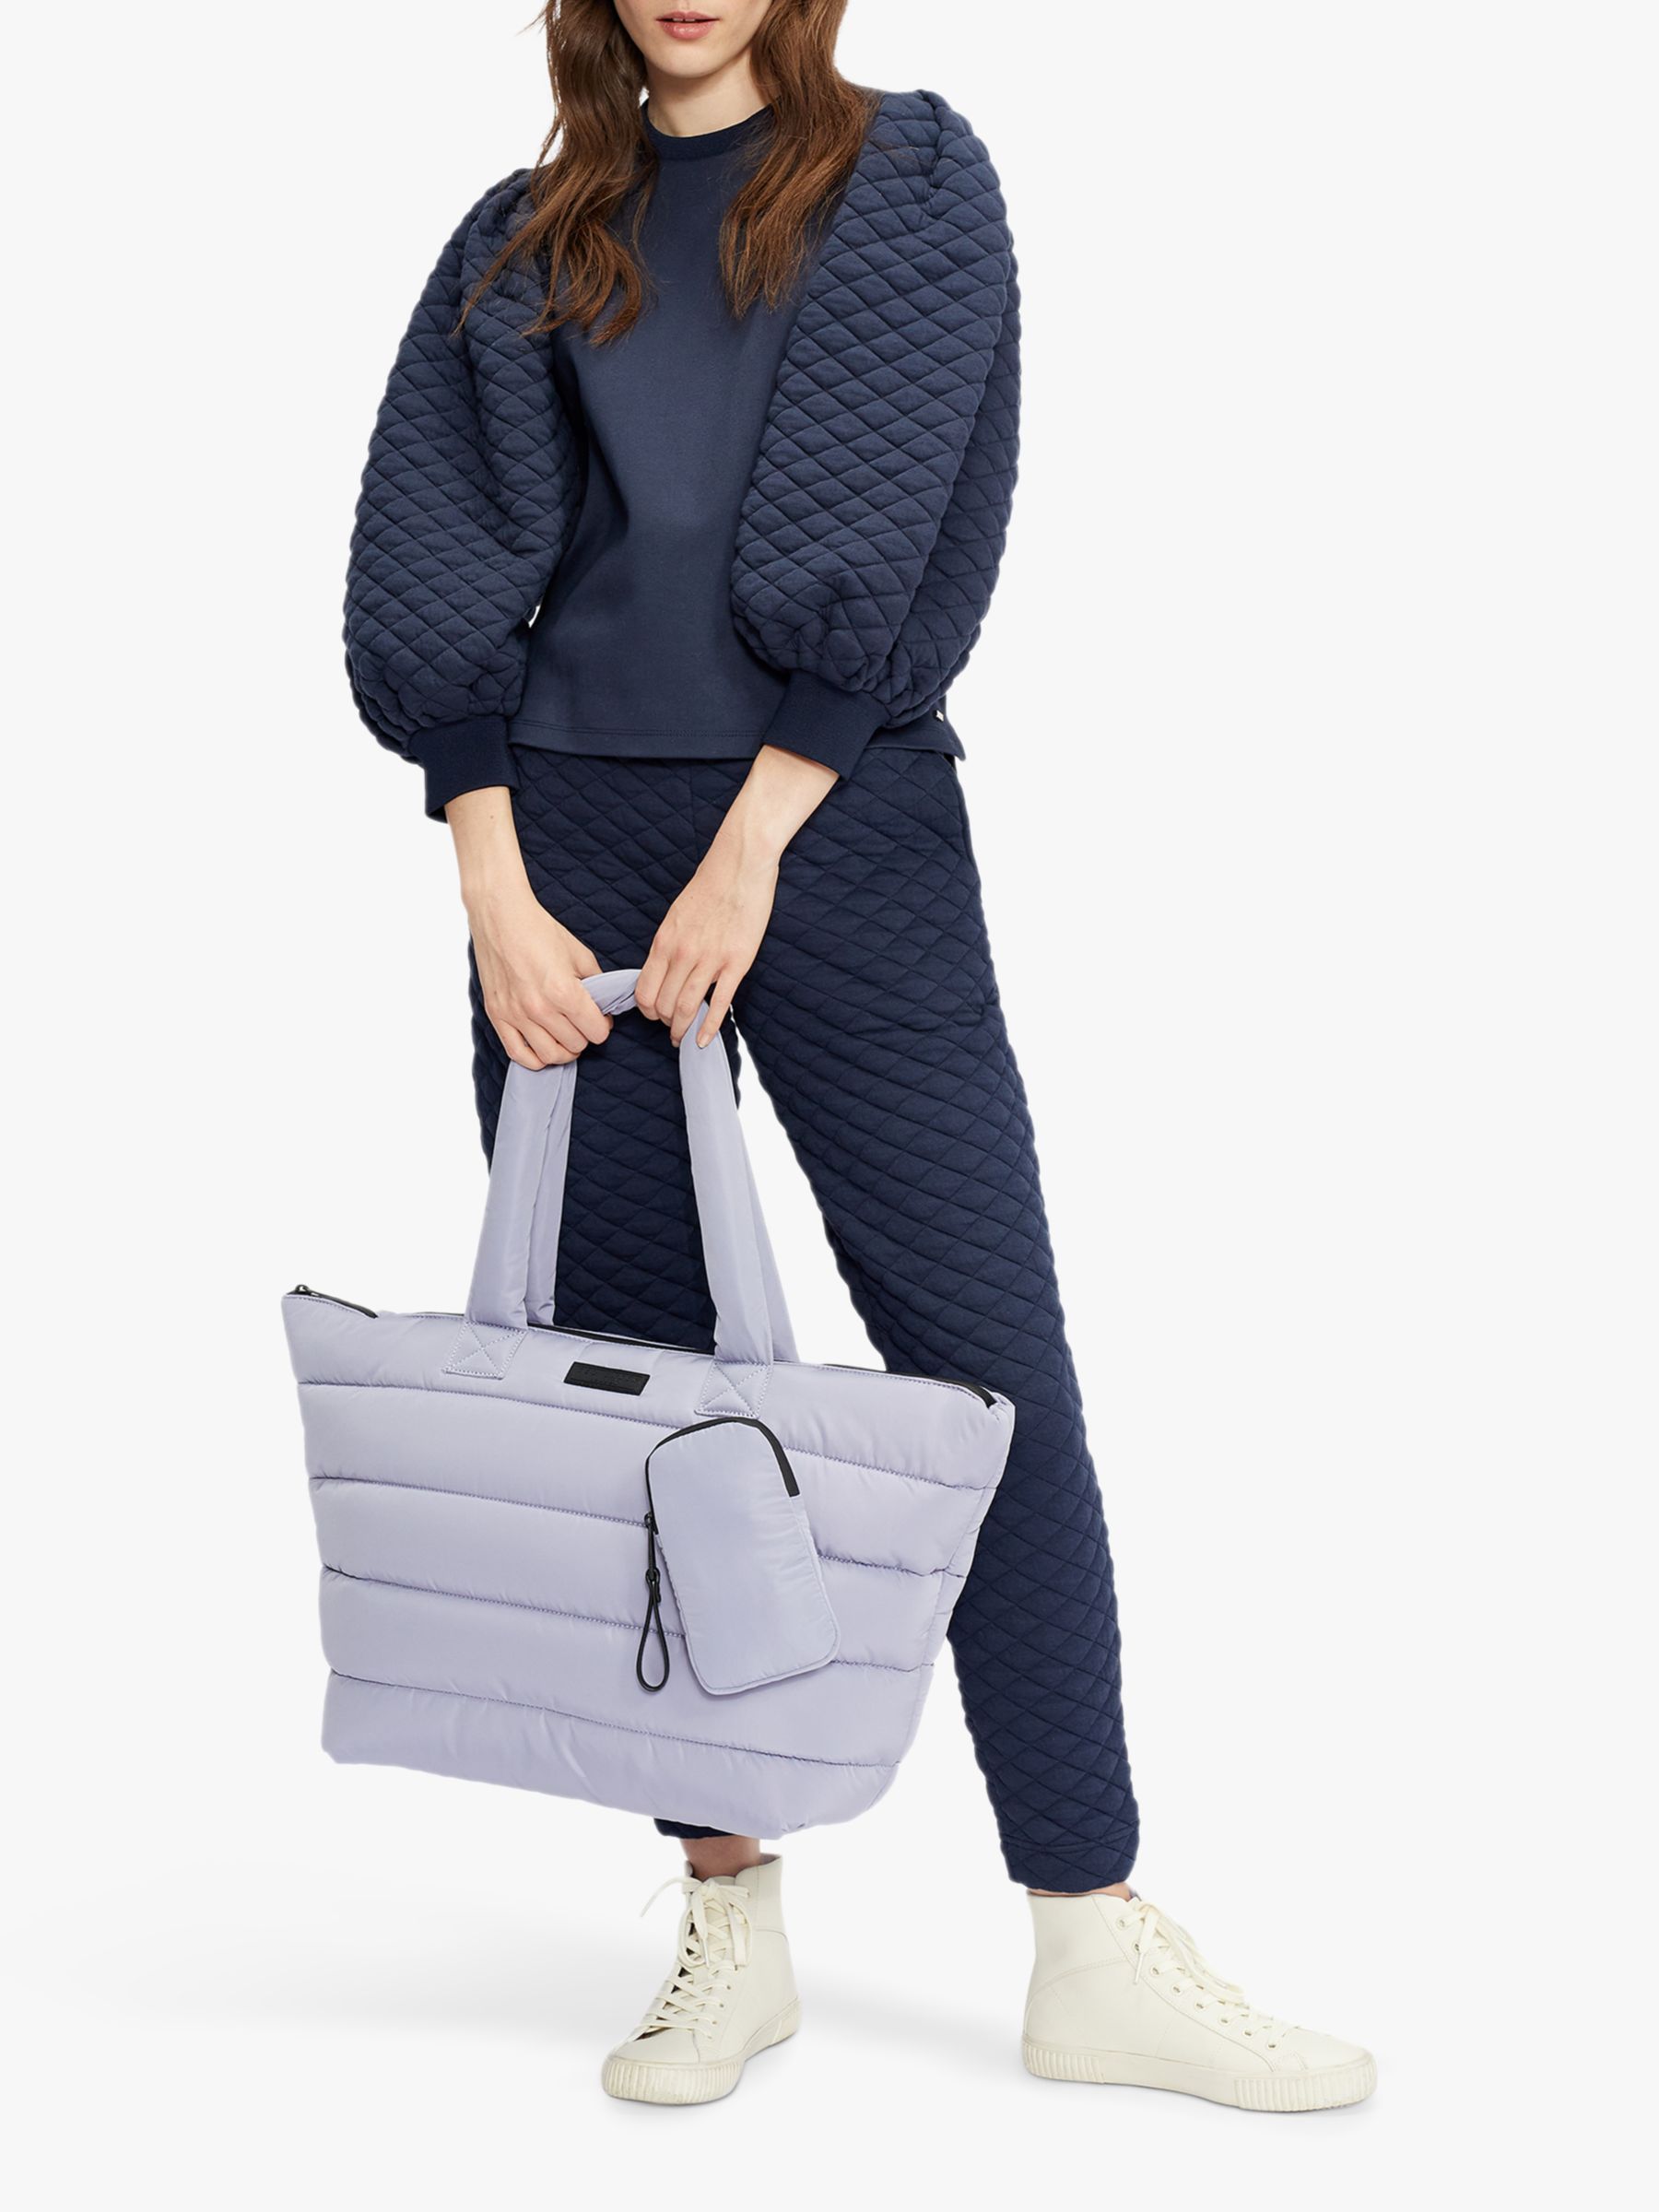 Ted Baker Quinsin Oversized Puffer Tote Bag, Grey at John Lewis & Partners